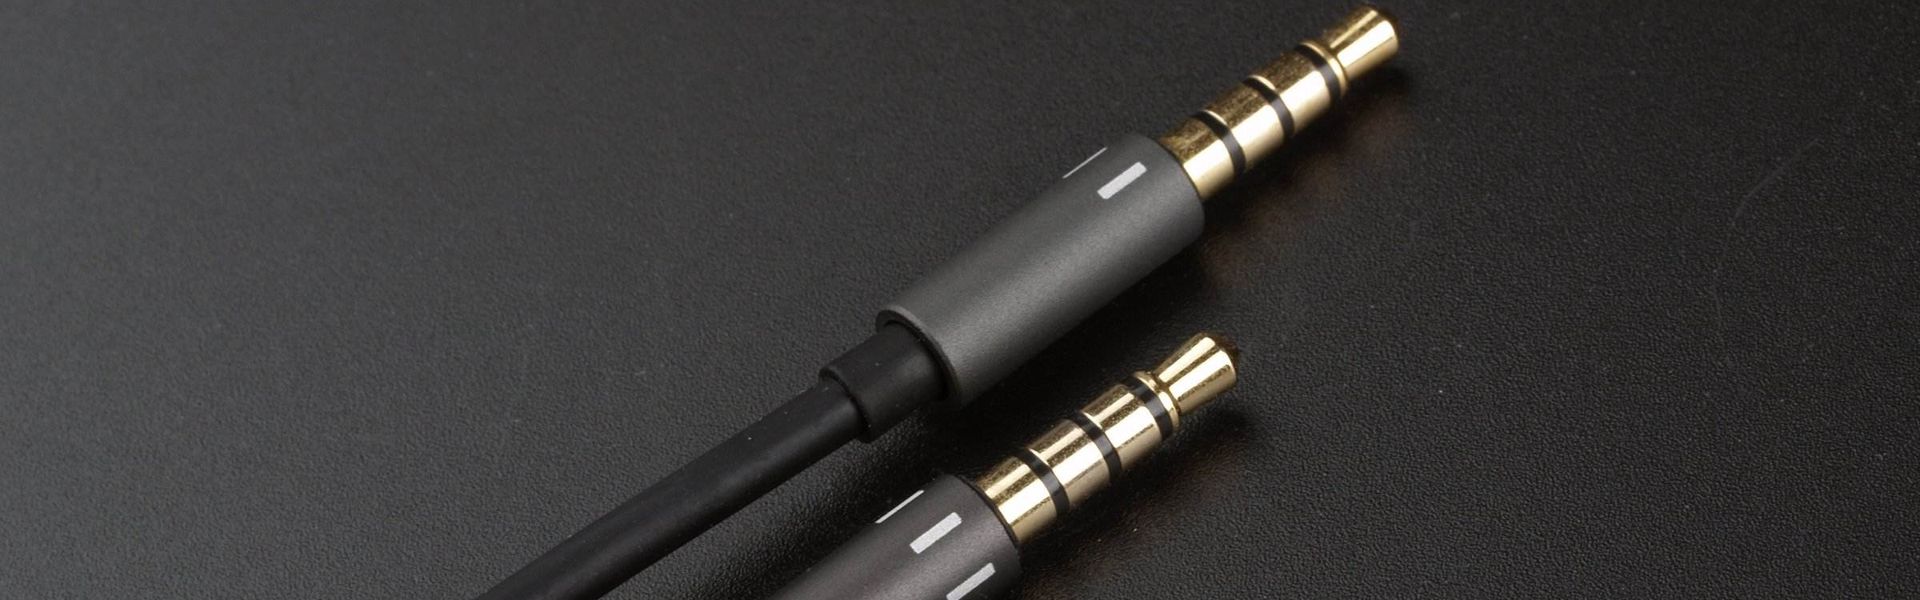 Homepage slide show good qulity audio vedio cable from china